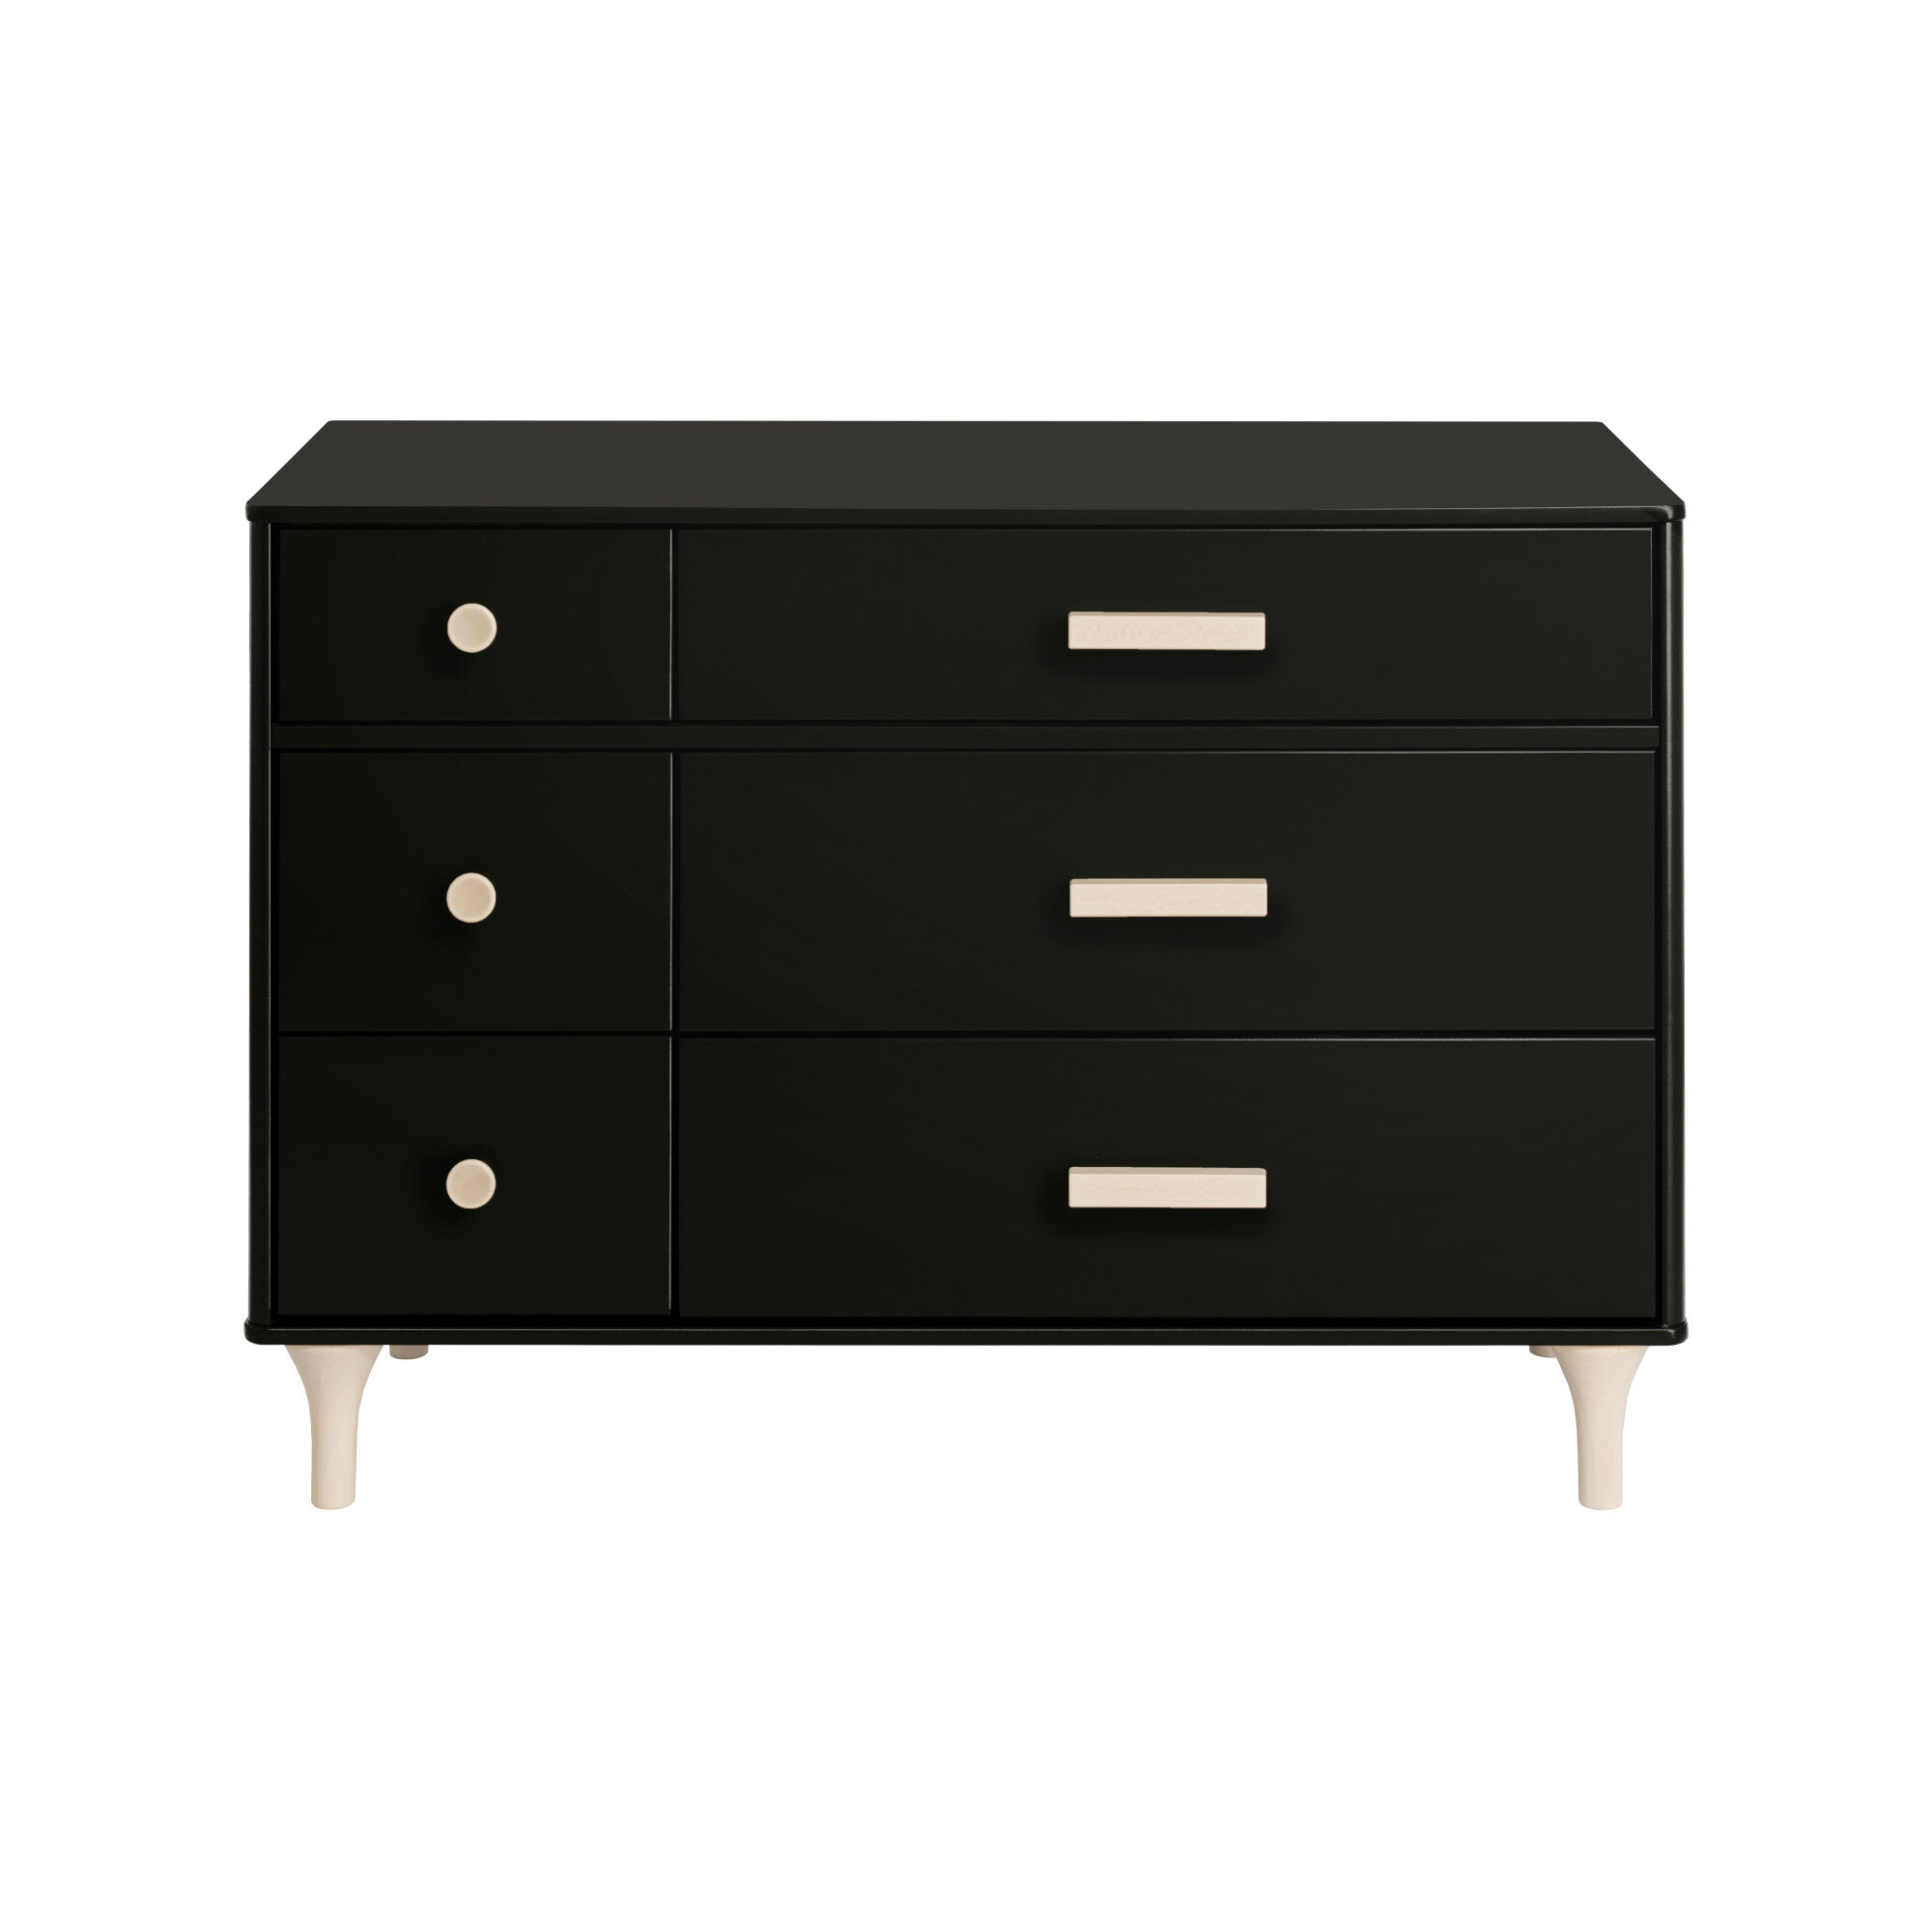 Babyletto Lolly 6 Drawer Double Dresser Reviews Wayfair